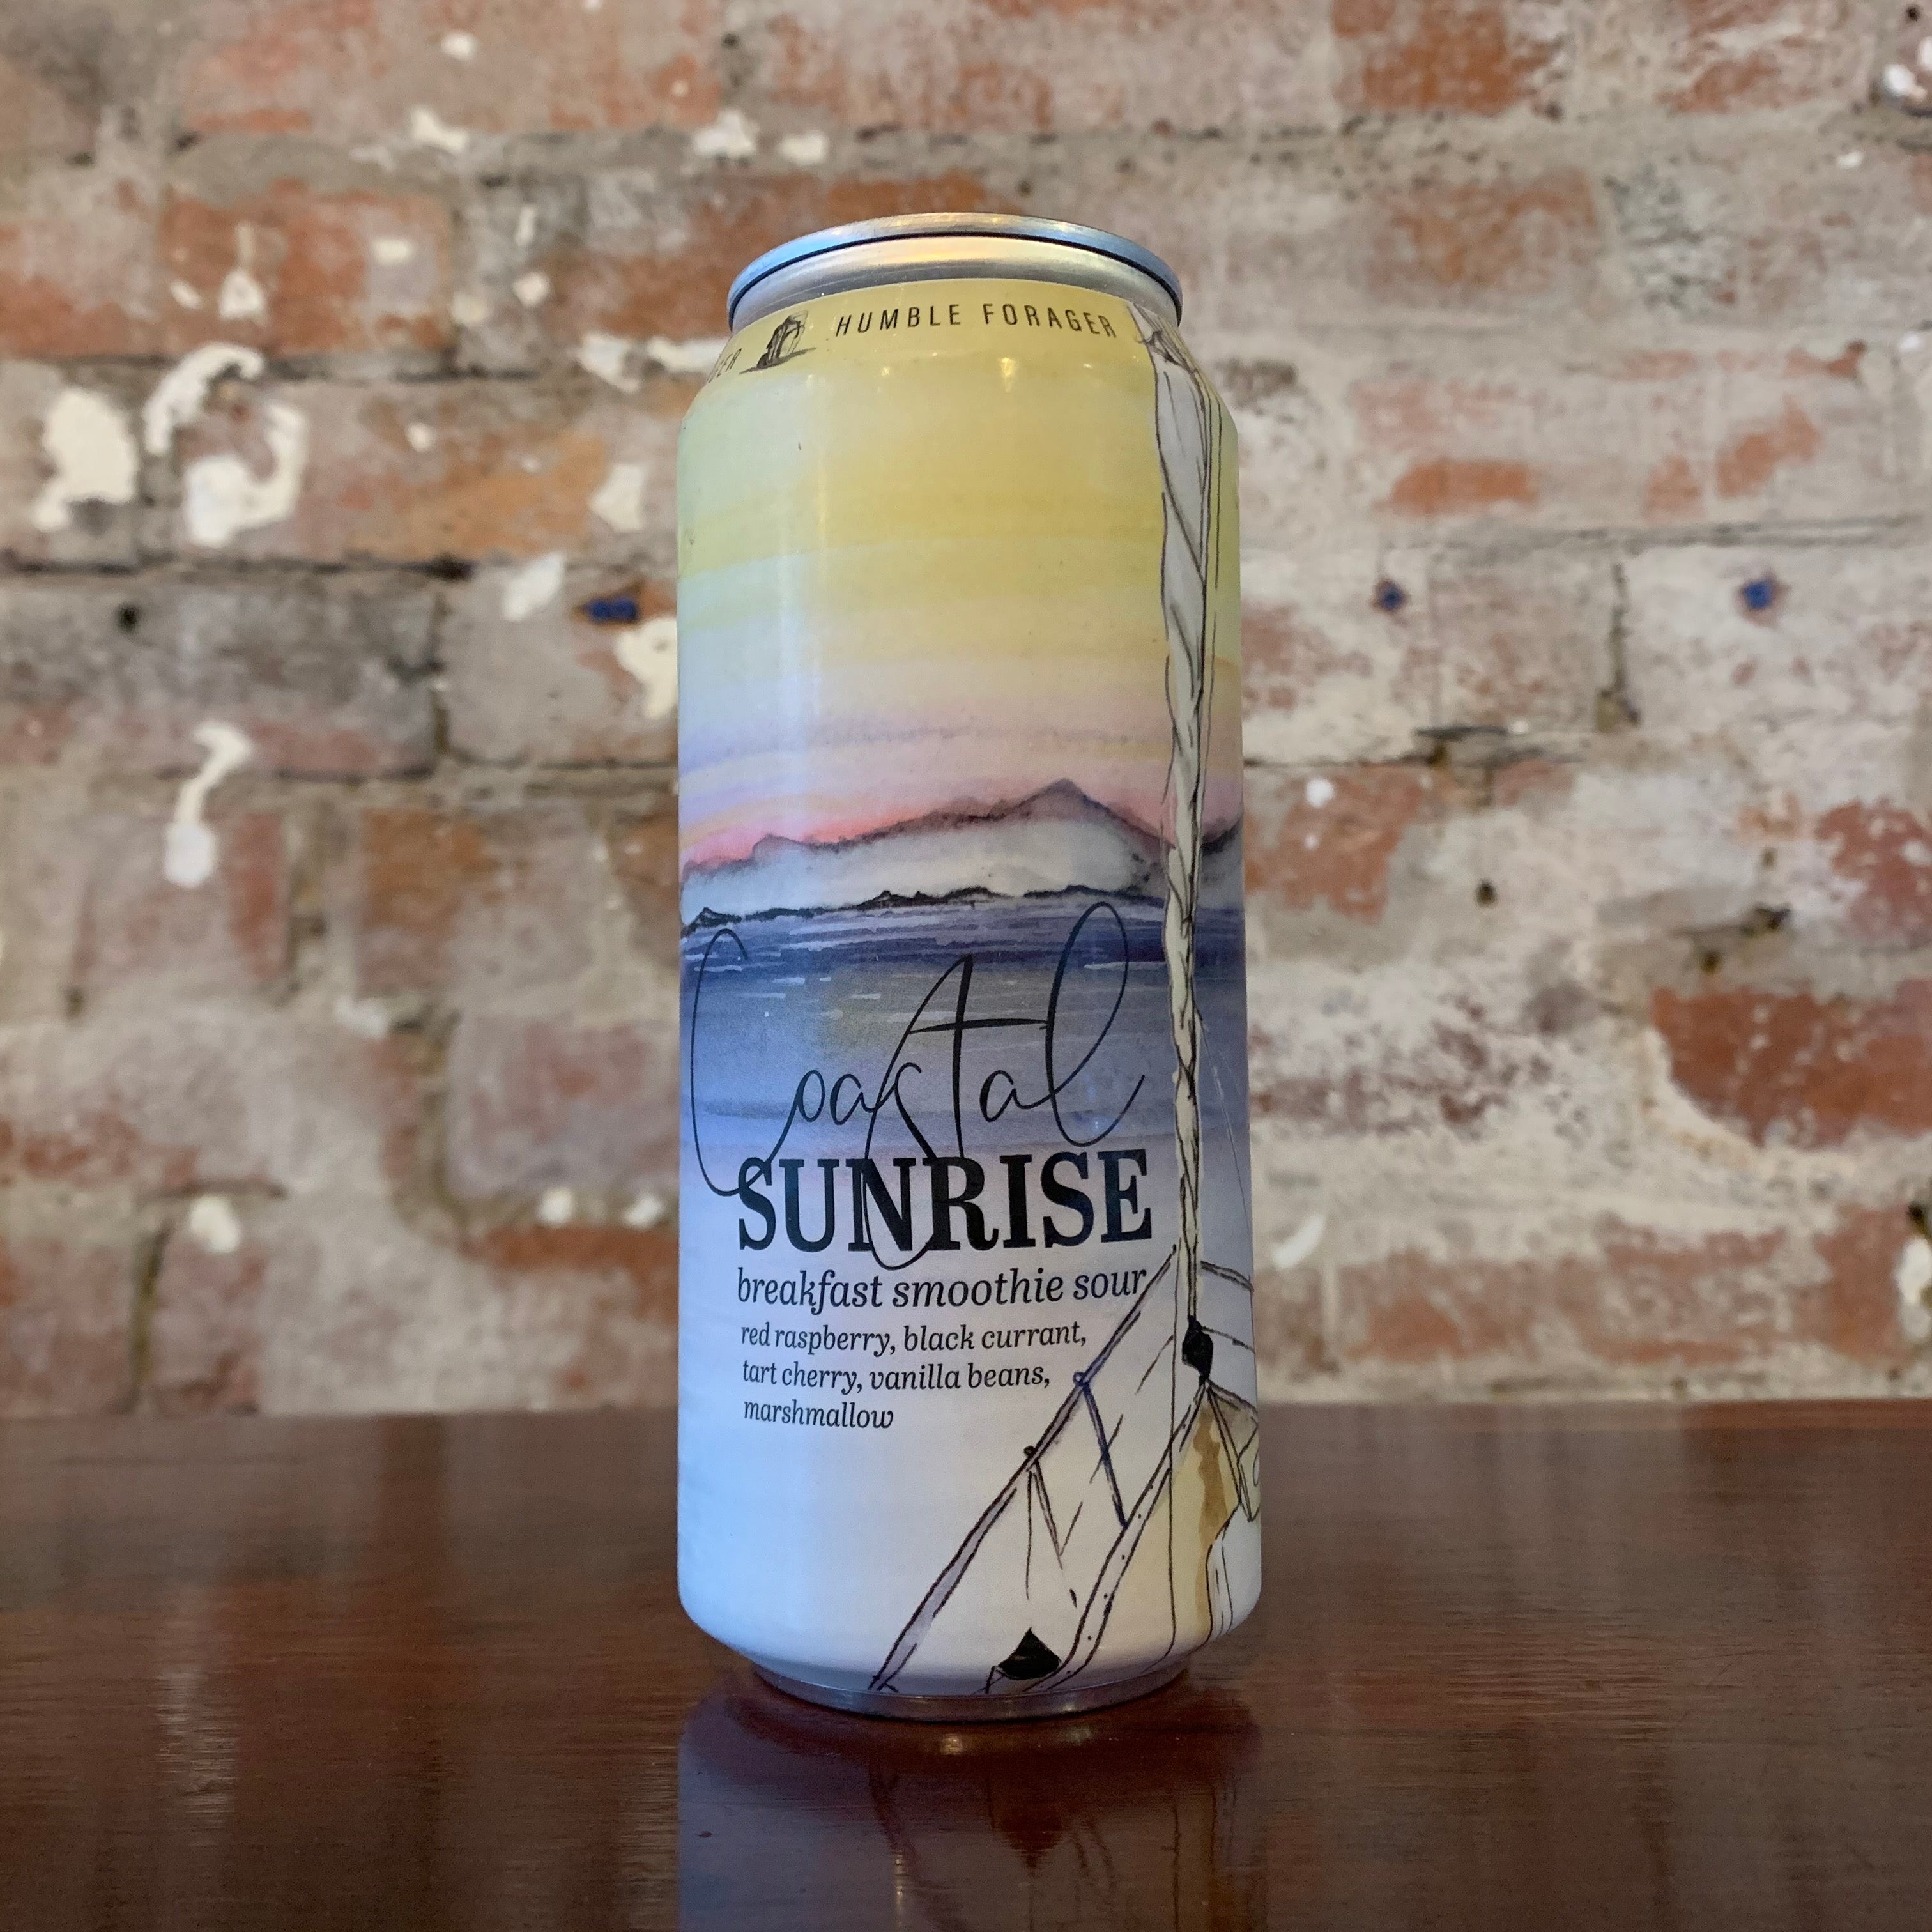 Humble Forager Coastal Sunrise Version 2 breakfast smoothie sour – Otter's  Promise